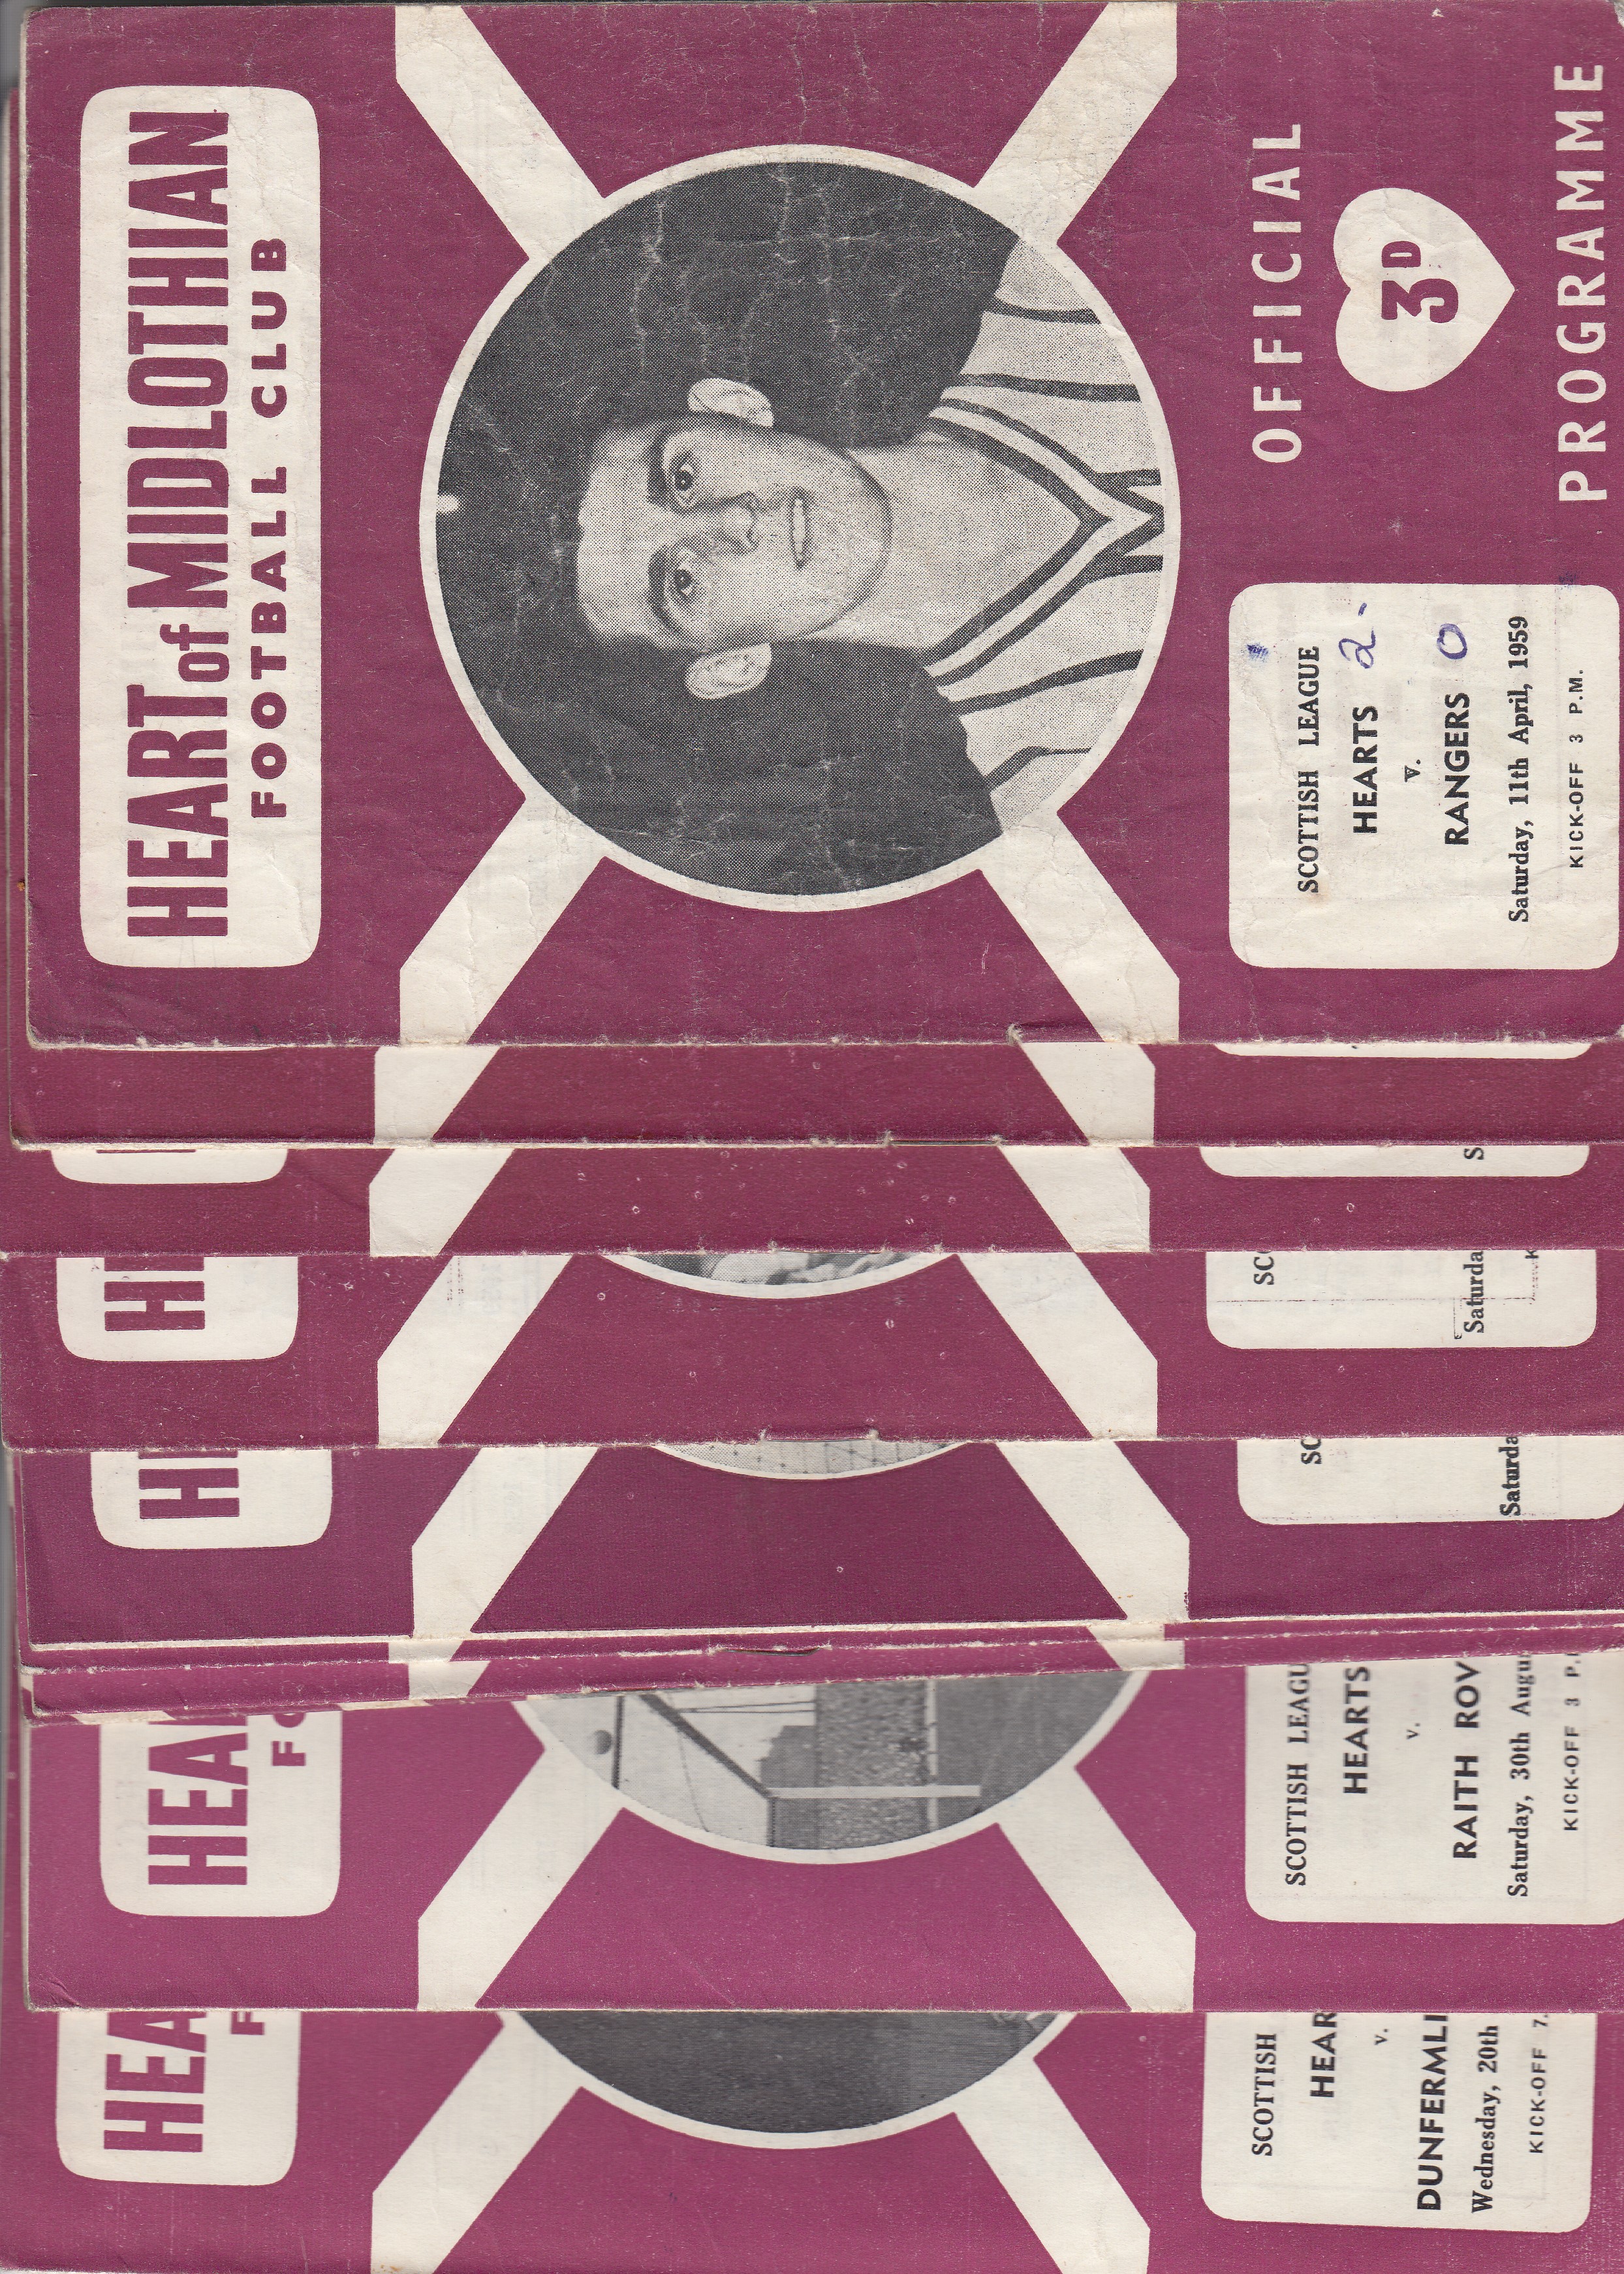 HEARTS 58-59 Eleven Hearts home programmes, 58-59, includes European Cup v Standard Liege, scores on - Image 3 of 3